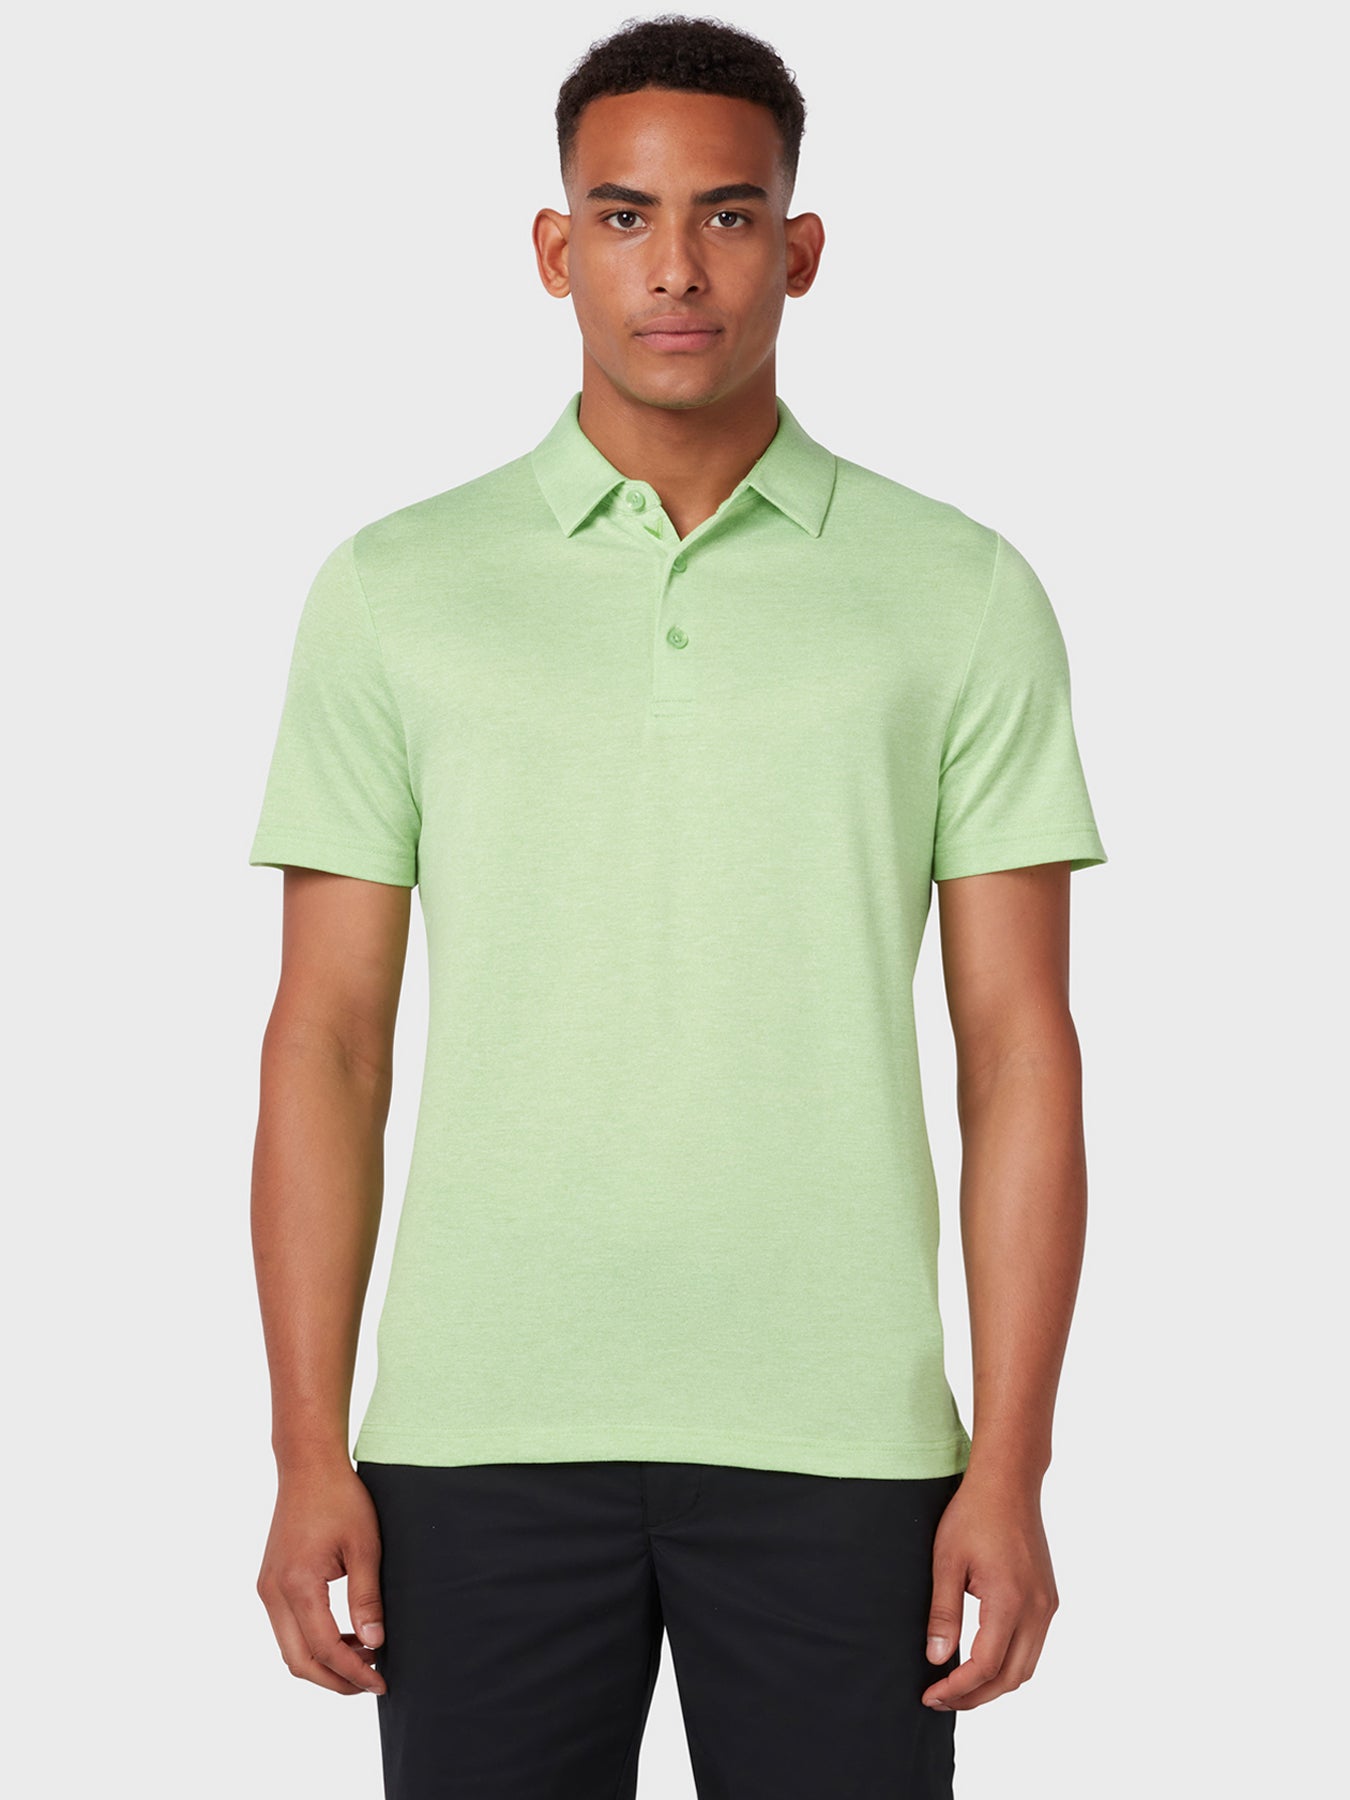 View Soft Touch Solid Polo In Summer Green Summer Green Htr XL information